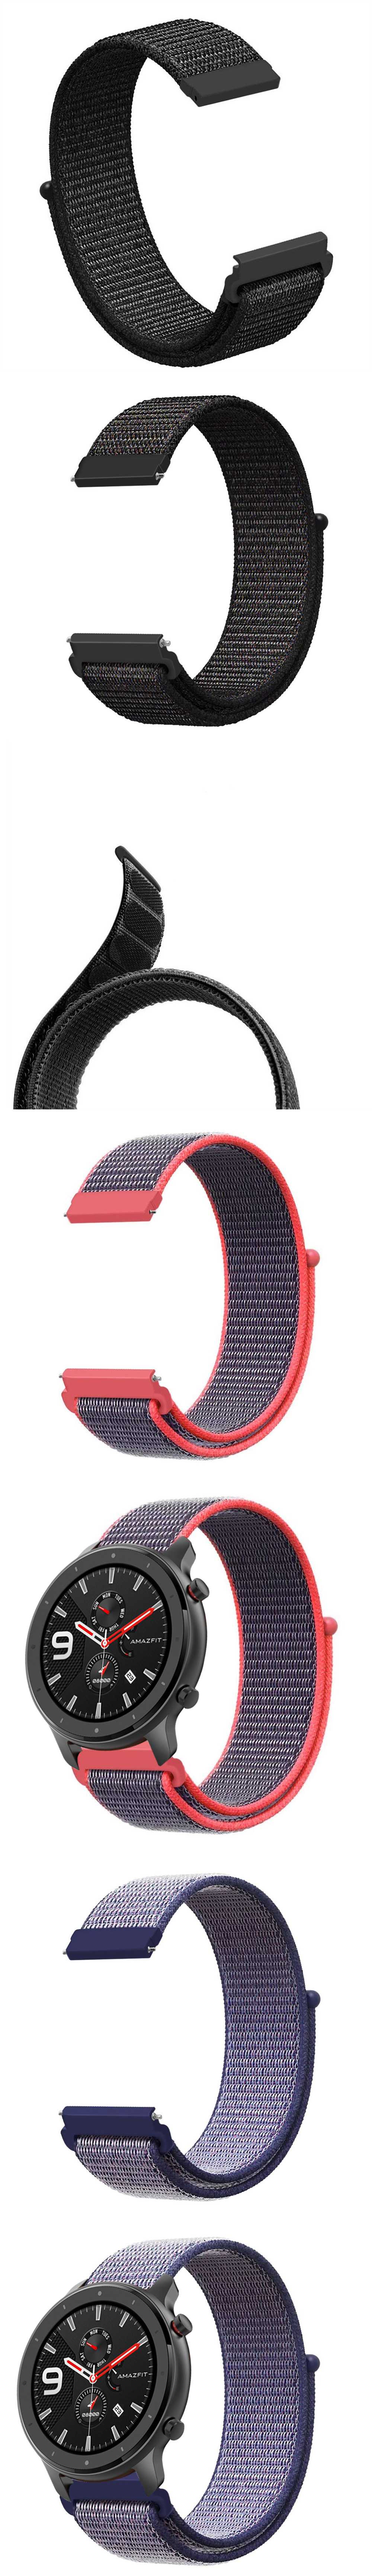 Nylon-Watch-Band-Watch-Strap-Replacement-for-47mm-Amazfit-GTR-Smart-Watch-1549327-2